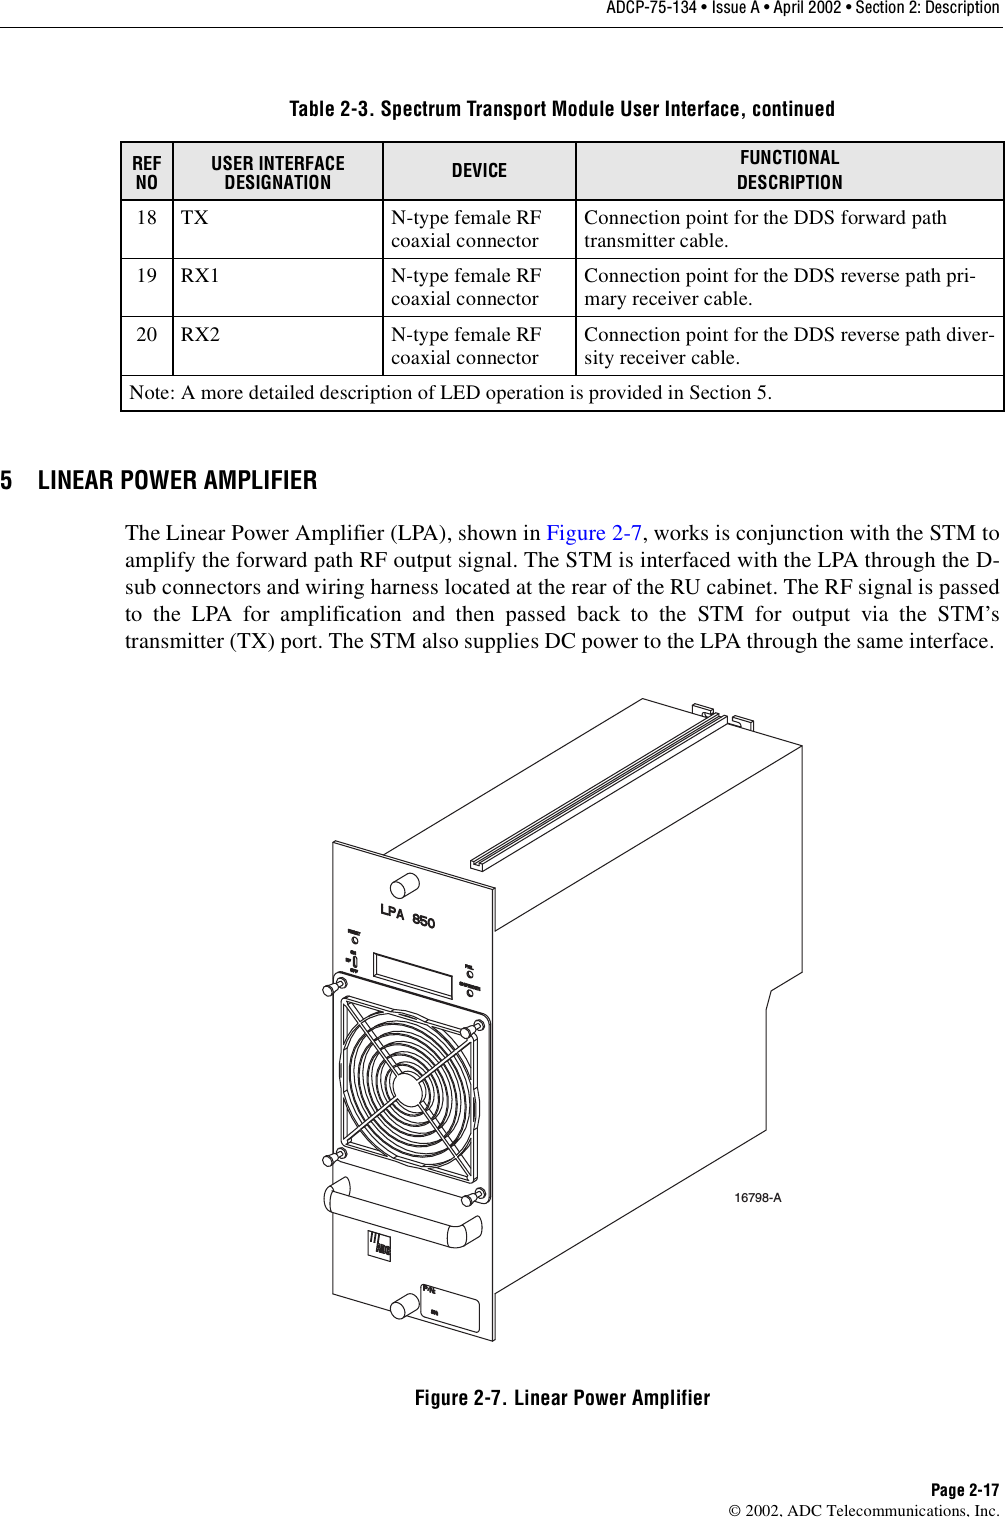 ADCP-75-134 • Issue A • April 2002 • Section 2: DescriptionPage 2-17©2002, ADC Telecommunications, Inc.5 LINEAR POWER AMPLIFIERThe Linear Power Amplifier (LPA), shown in Figure 2-7,works is conjunction with the STM toamplify the forward path RF output signal. The STM is interfaced with the LPA through the D-sub connectors and wiring harness located at the rear of the RU cabinet. The RF signal is passedto the LPA for amplification and then passed back to the STM for output via the STM’stransmitter (TX) port. The STM also supplies DC power to the LPA through the same interface.Figure 2-7. Linear Power Amplifier18 TX N-type female RFcoaxial connector Connection point for the DDS forward pathtransmitter cable.19 RX1 N-type female RFcoaxial connector Connection point for the DDS reverse path pri-mary receiver cable.20 RX2 N-type female RFcoaxial connector Connection point for the DDS reverse path diver-sity receiver cable.Note: Amore detailed description of LED operation is provided in Section 5.Table 2-3. Spectrum Transport Module User Interface, continuedREF NOUSER INTERFACE DESIGNATION DEVICE FUNCTIONALDESCRIPTION16798-A